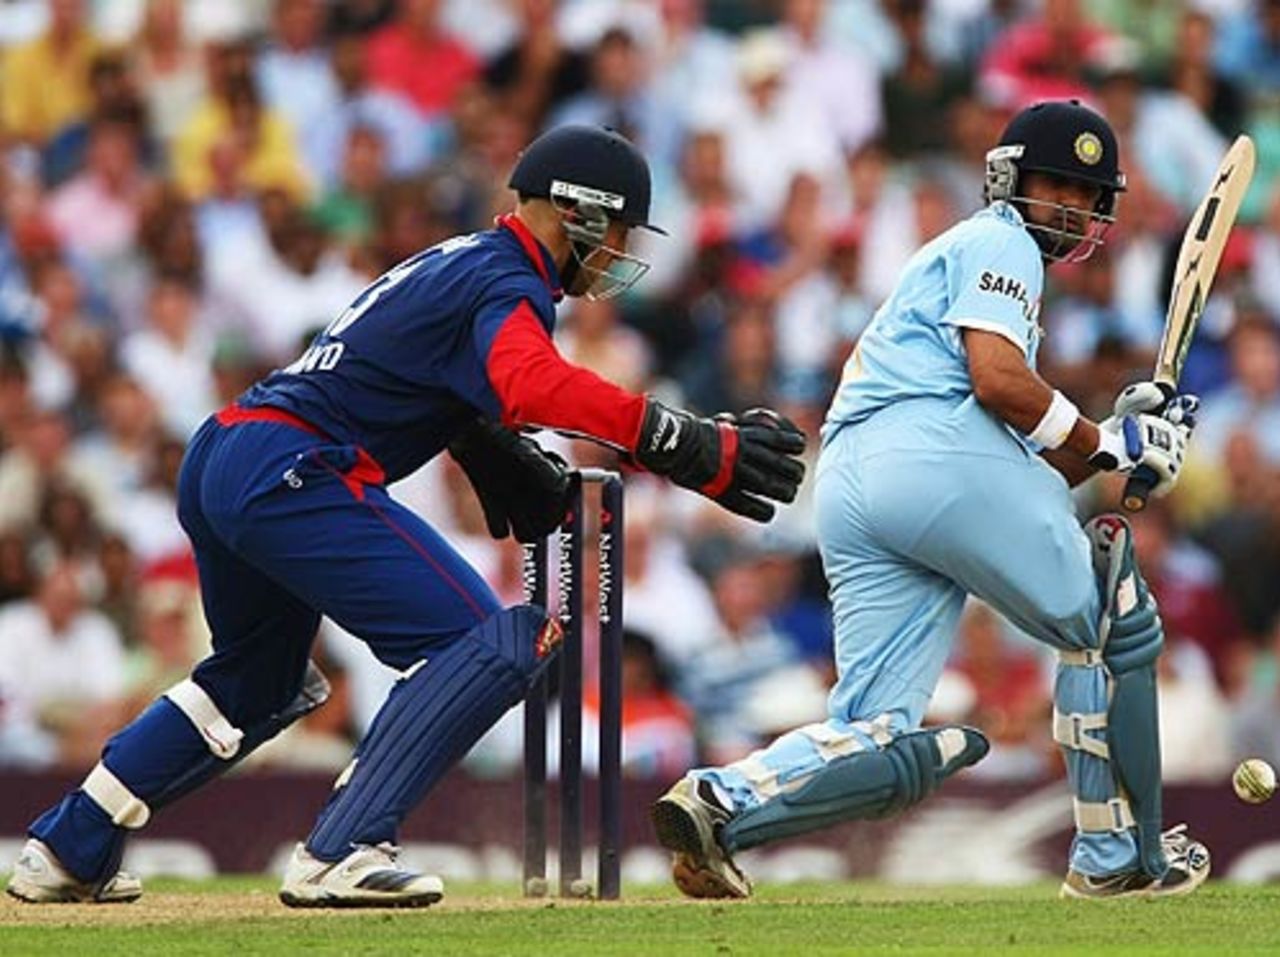 Gautam Gambhir nudges one to the on side, England v India, 6th ODI, The Oval, September 5, 2007